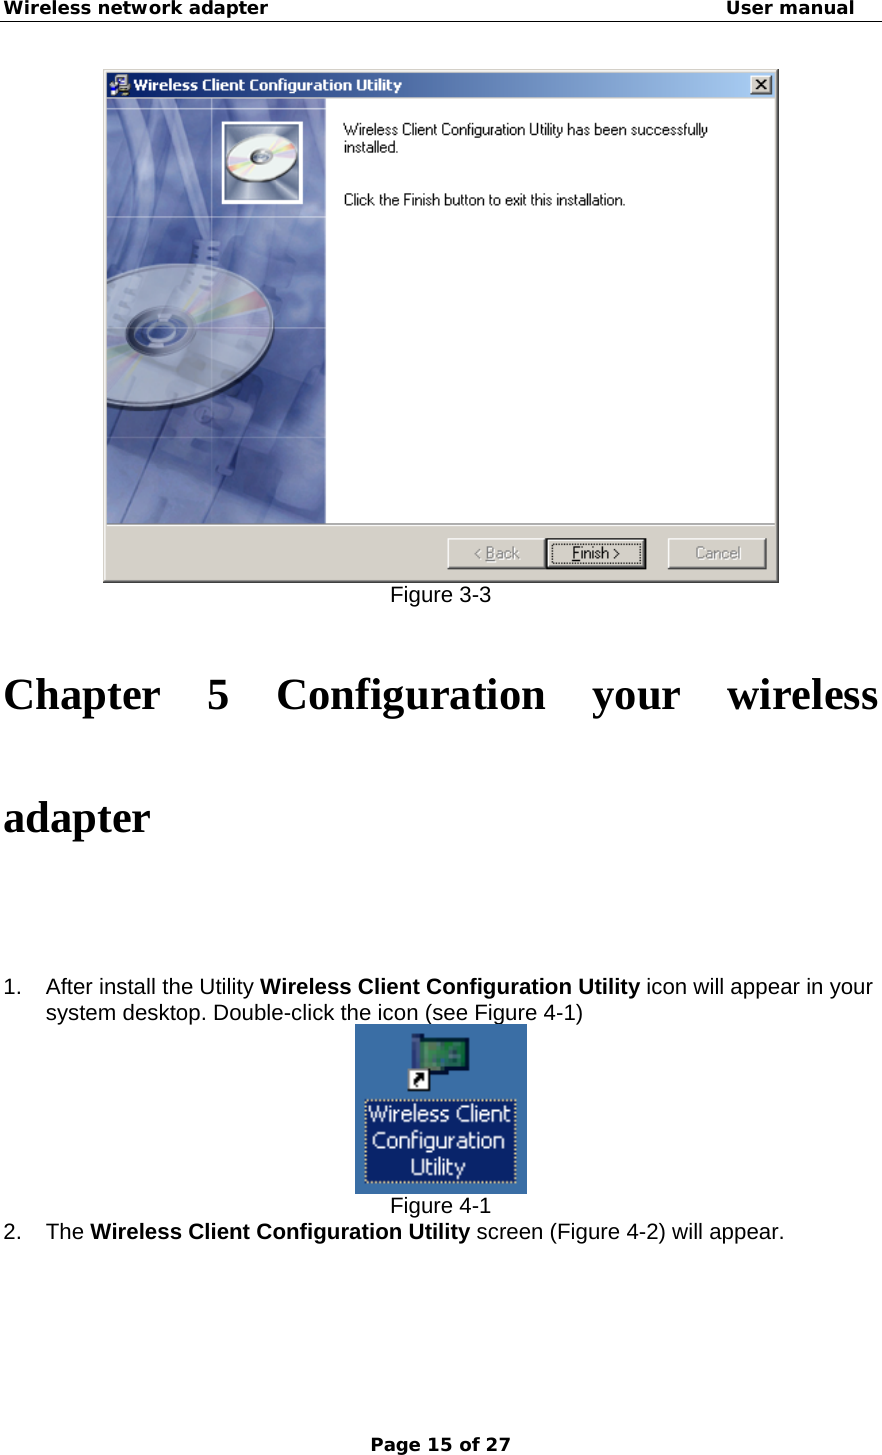 Wireless network adapter                                                  User manual Page 15 of 27  Figure 3-3  Chapter 5 Configuration your wireless adapter   1.  After install the Utility Wireless Client Configuration Utility icon will appear in your system desktop. Double-click the icon (see Figure 4-1)  Figure 4-1 2. The Wireless Client Configuration Utility screen (Figure 4-2) will appear. 